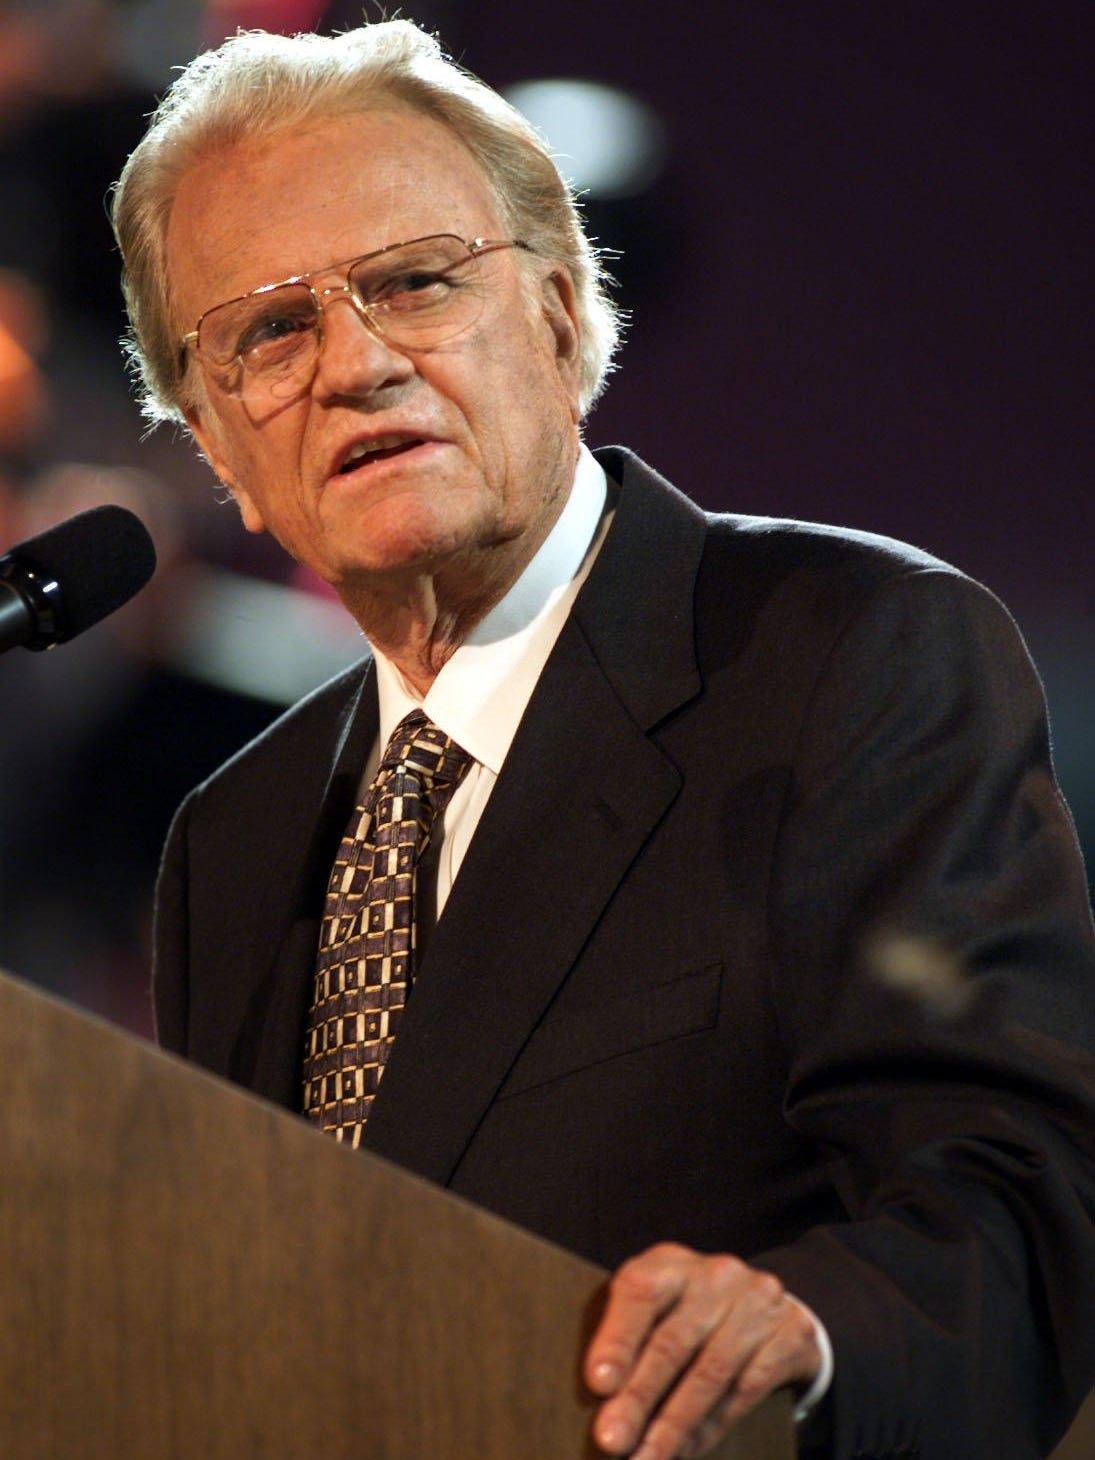 DOWNLOAD MP3: ARE YOU OFFENDED BY THE CROSS By Evangelist Billy Graham(sermon) 2